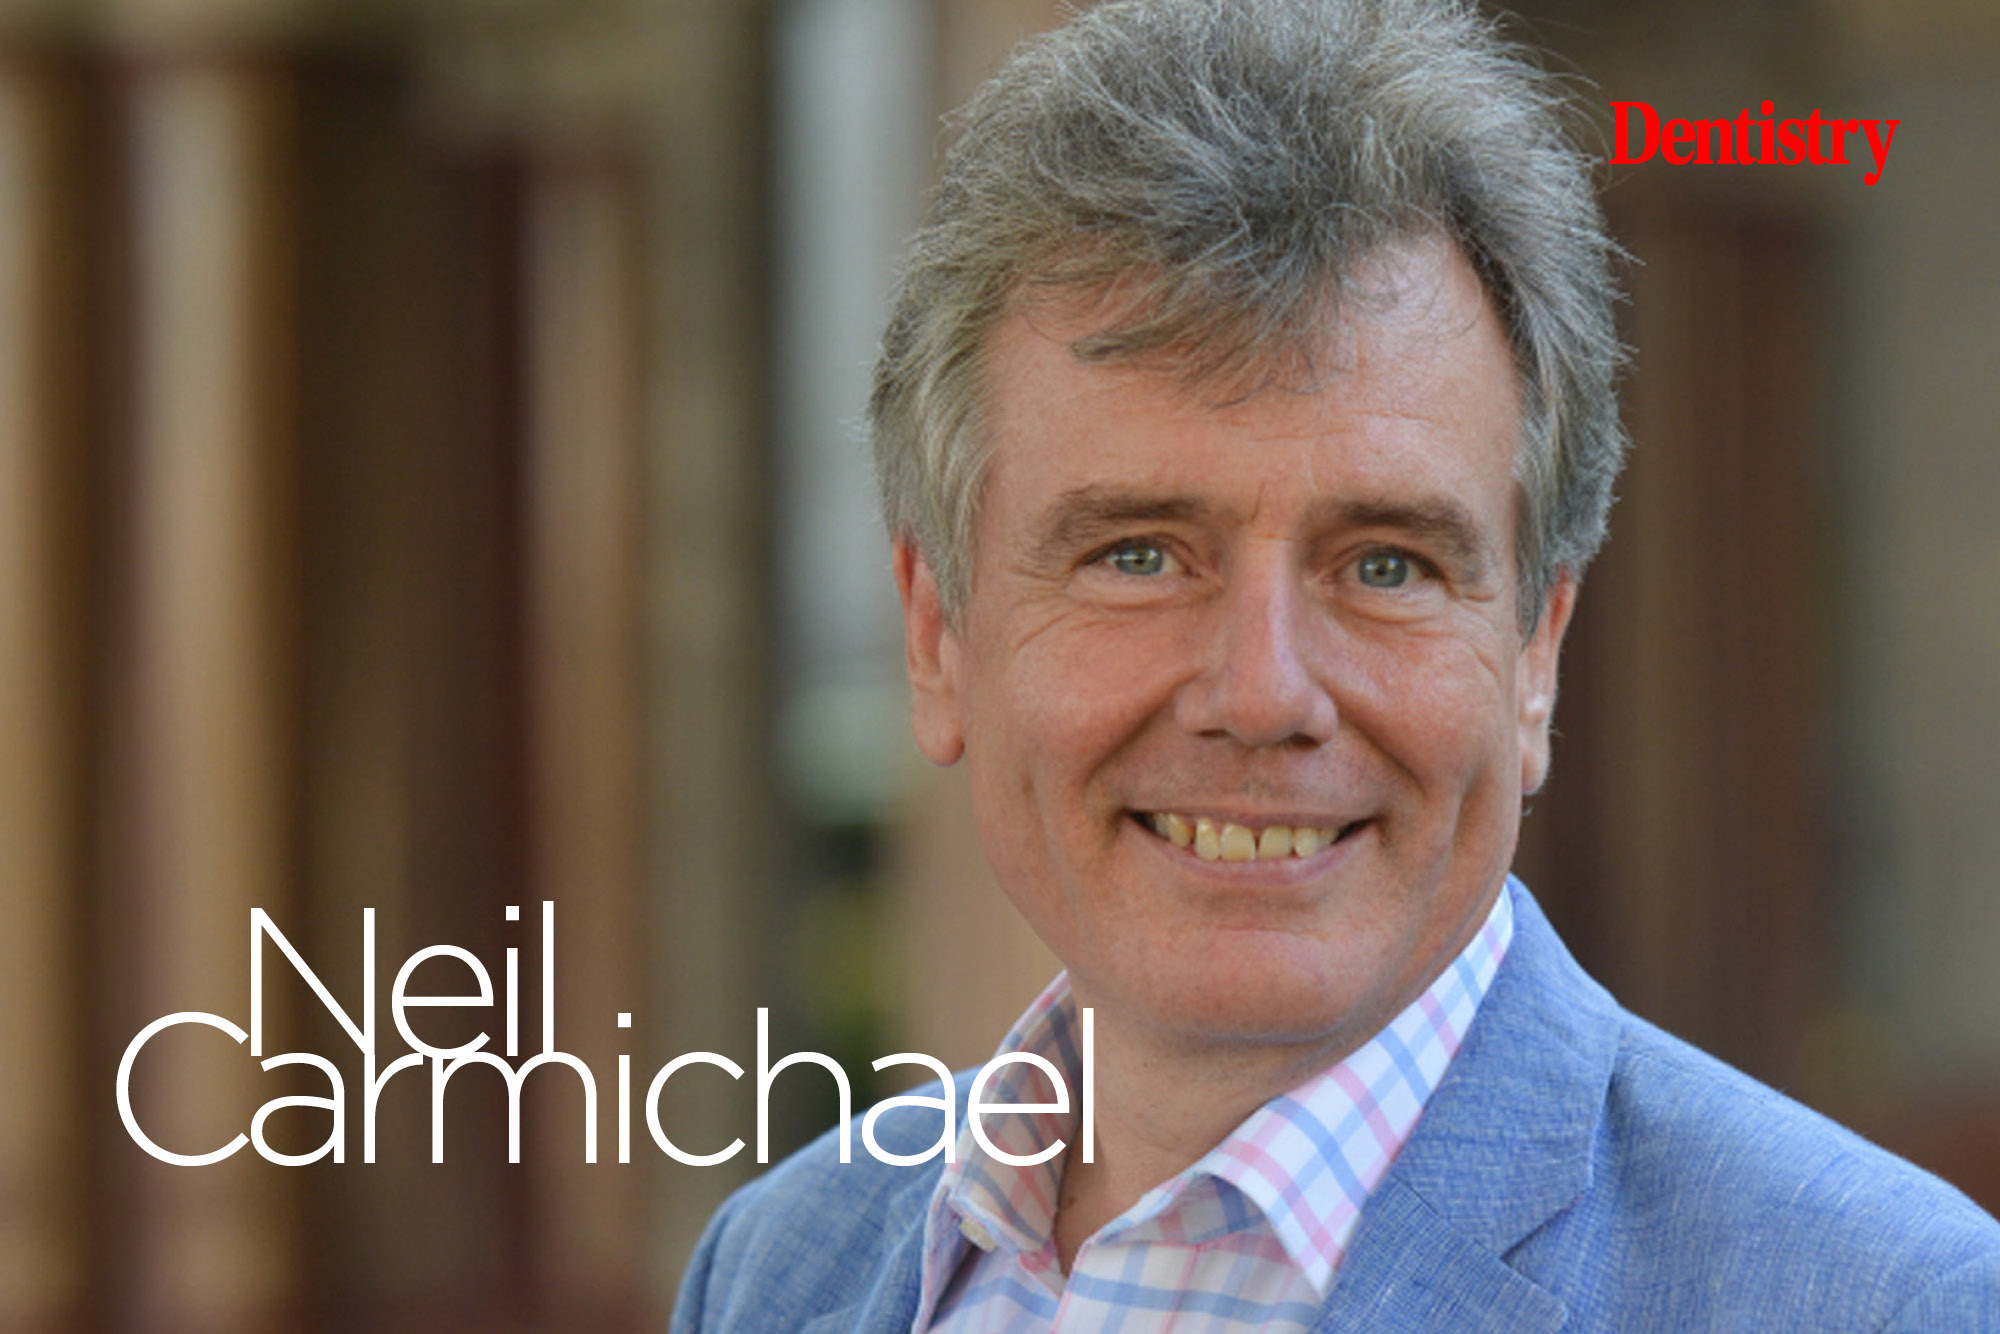 Dentistry podcast – Neil Carmichael on the future of dentistry